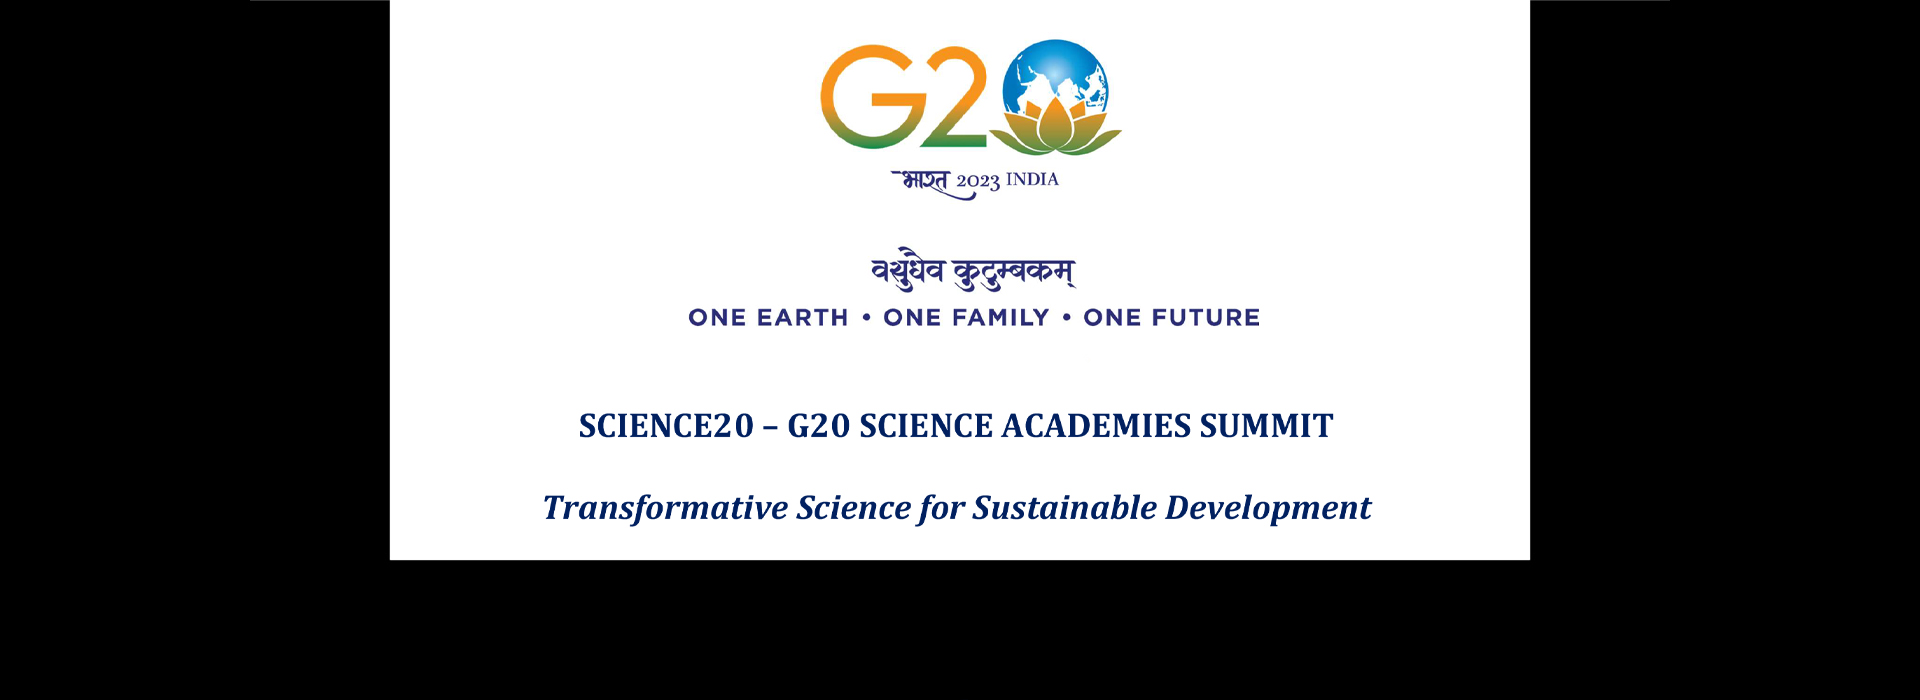 Science20 Declaration to G20 Countries